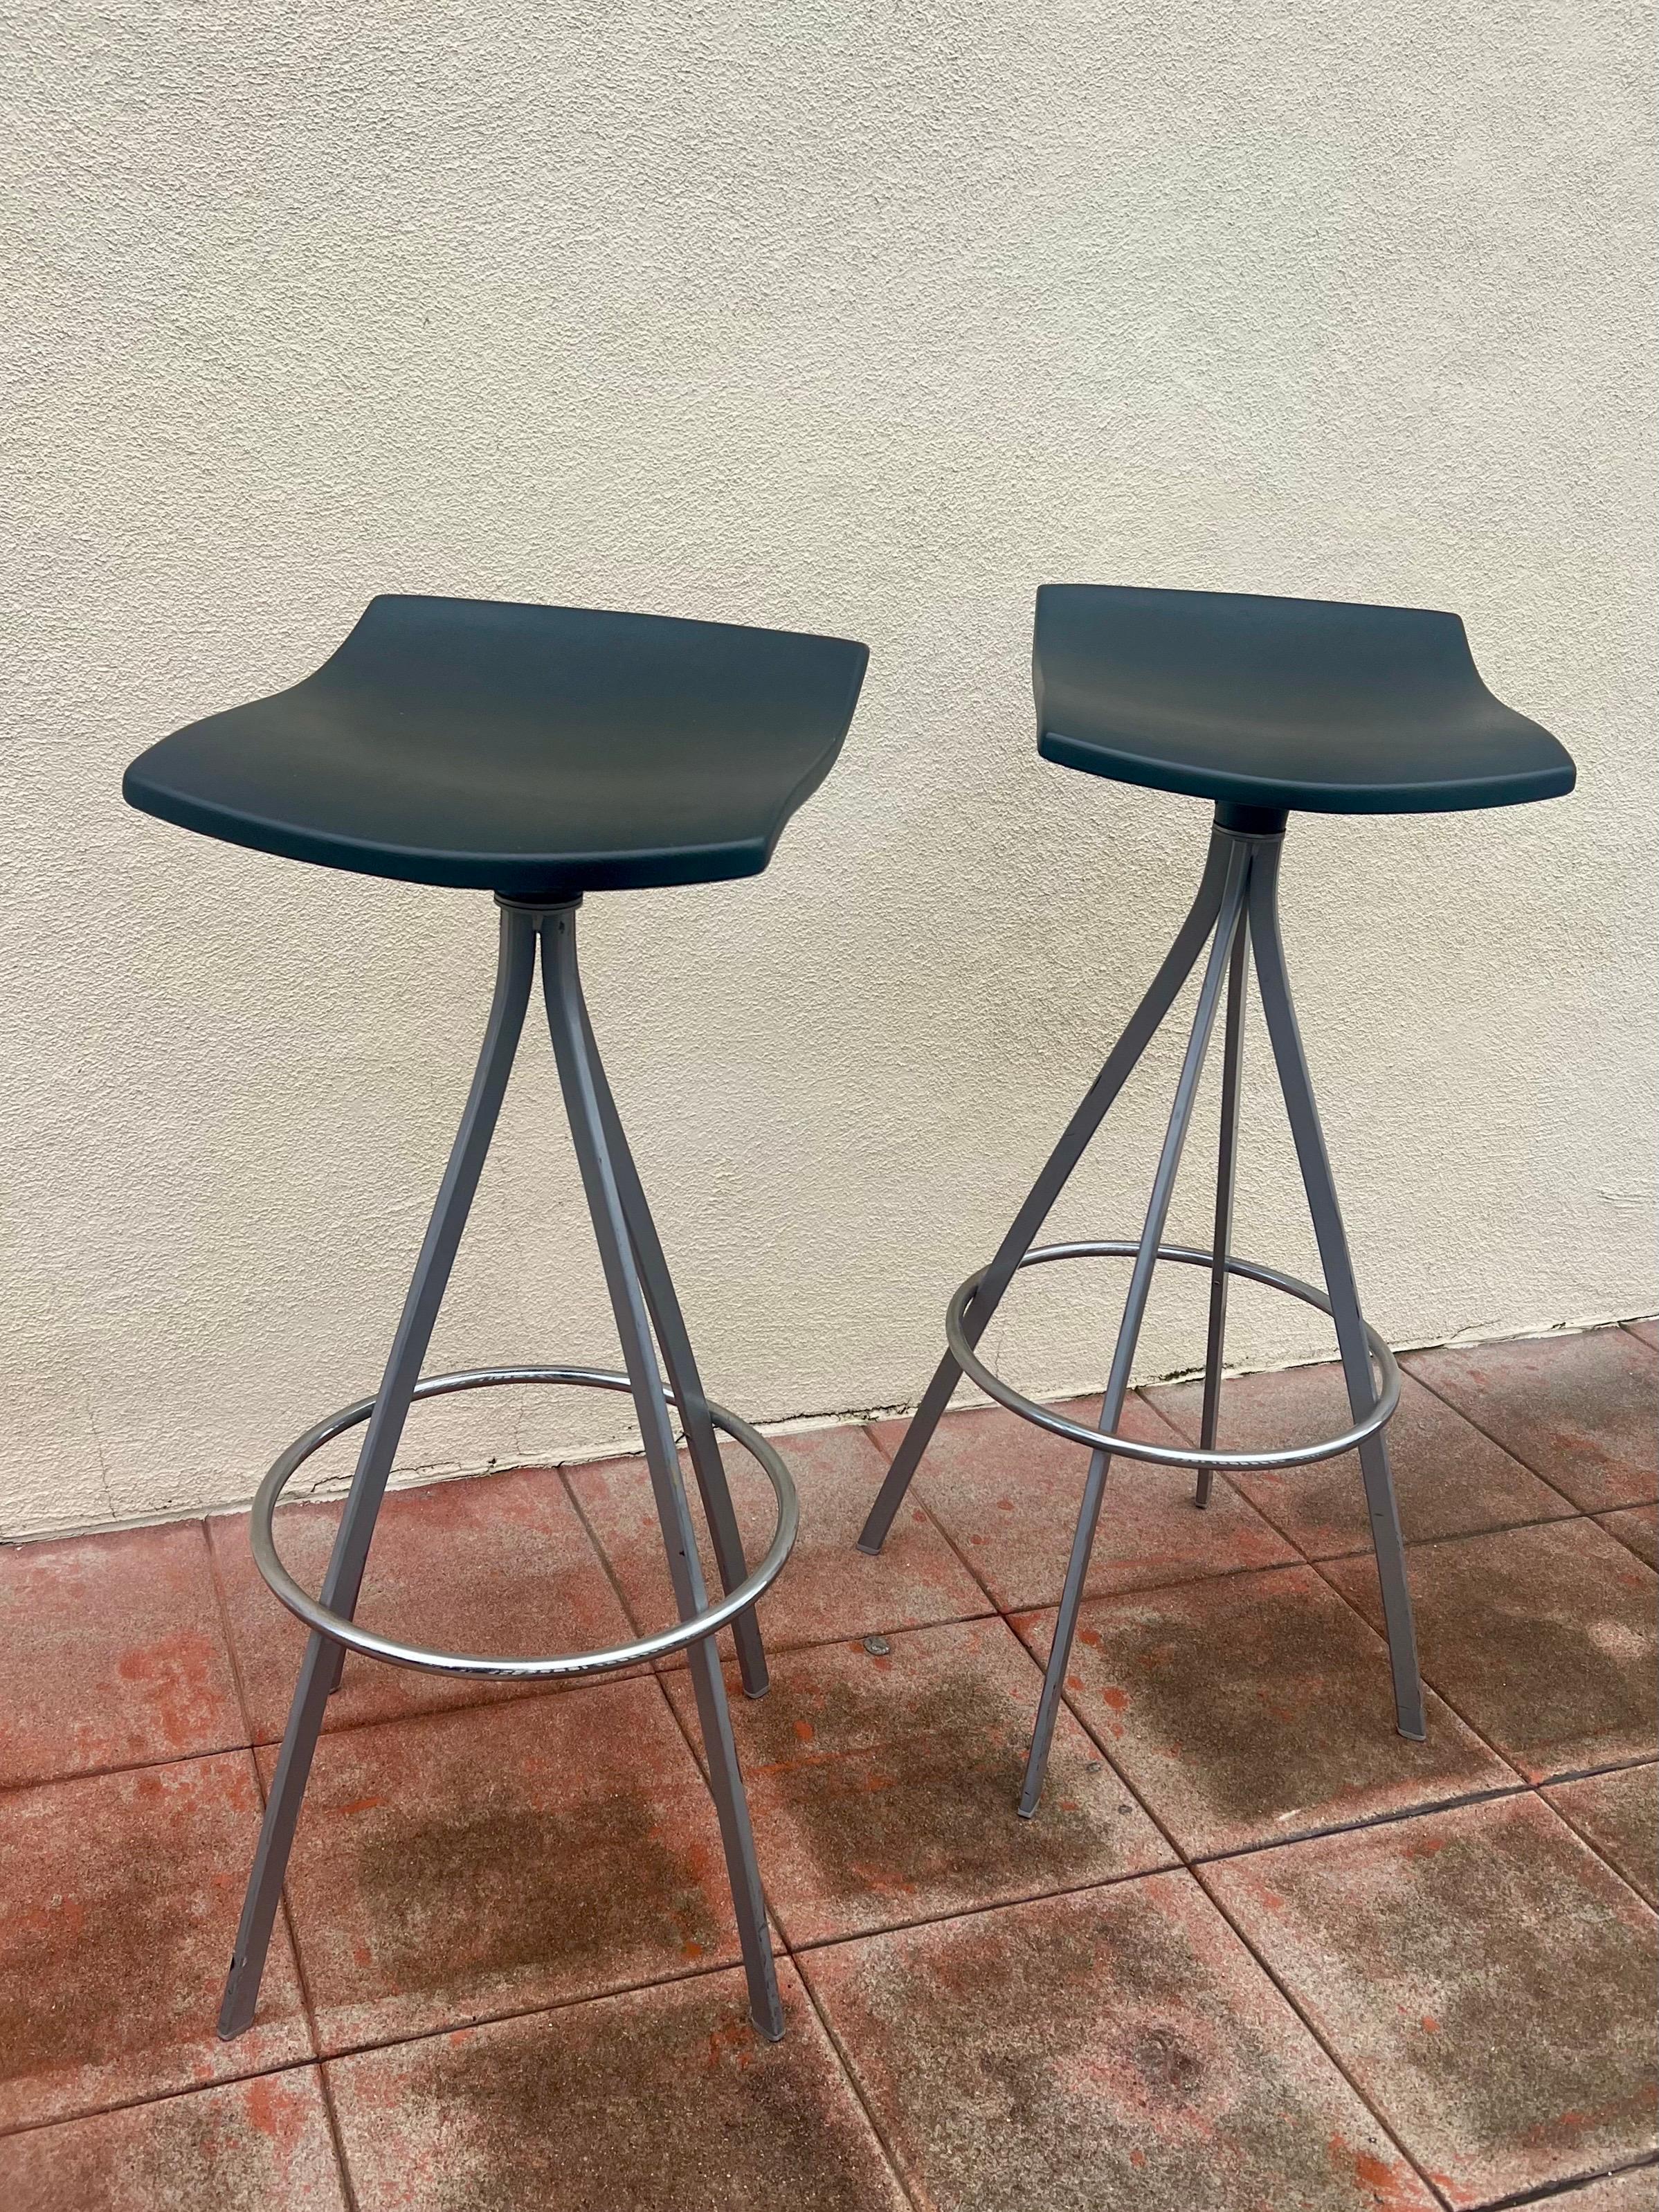 Post-Modern Pair of Postmodern stools Designed by Jorge Pensi for Mobles 114 Barcelona For Sale